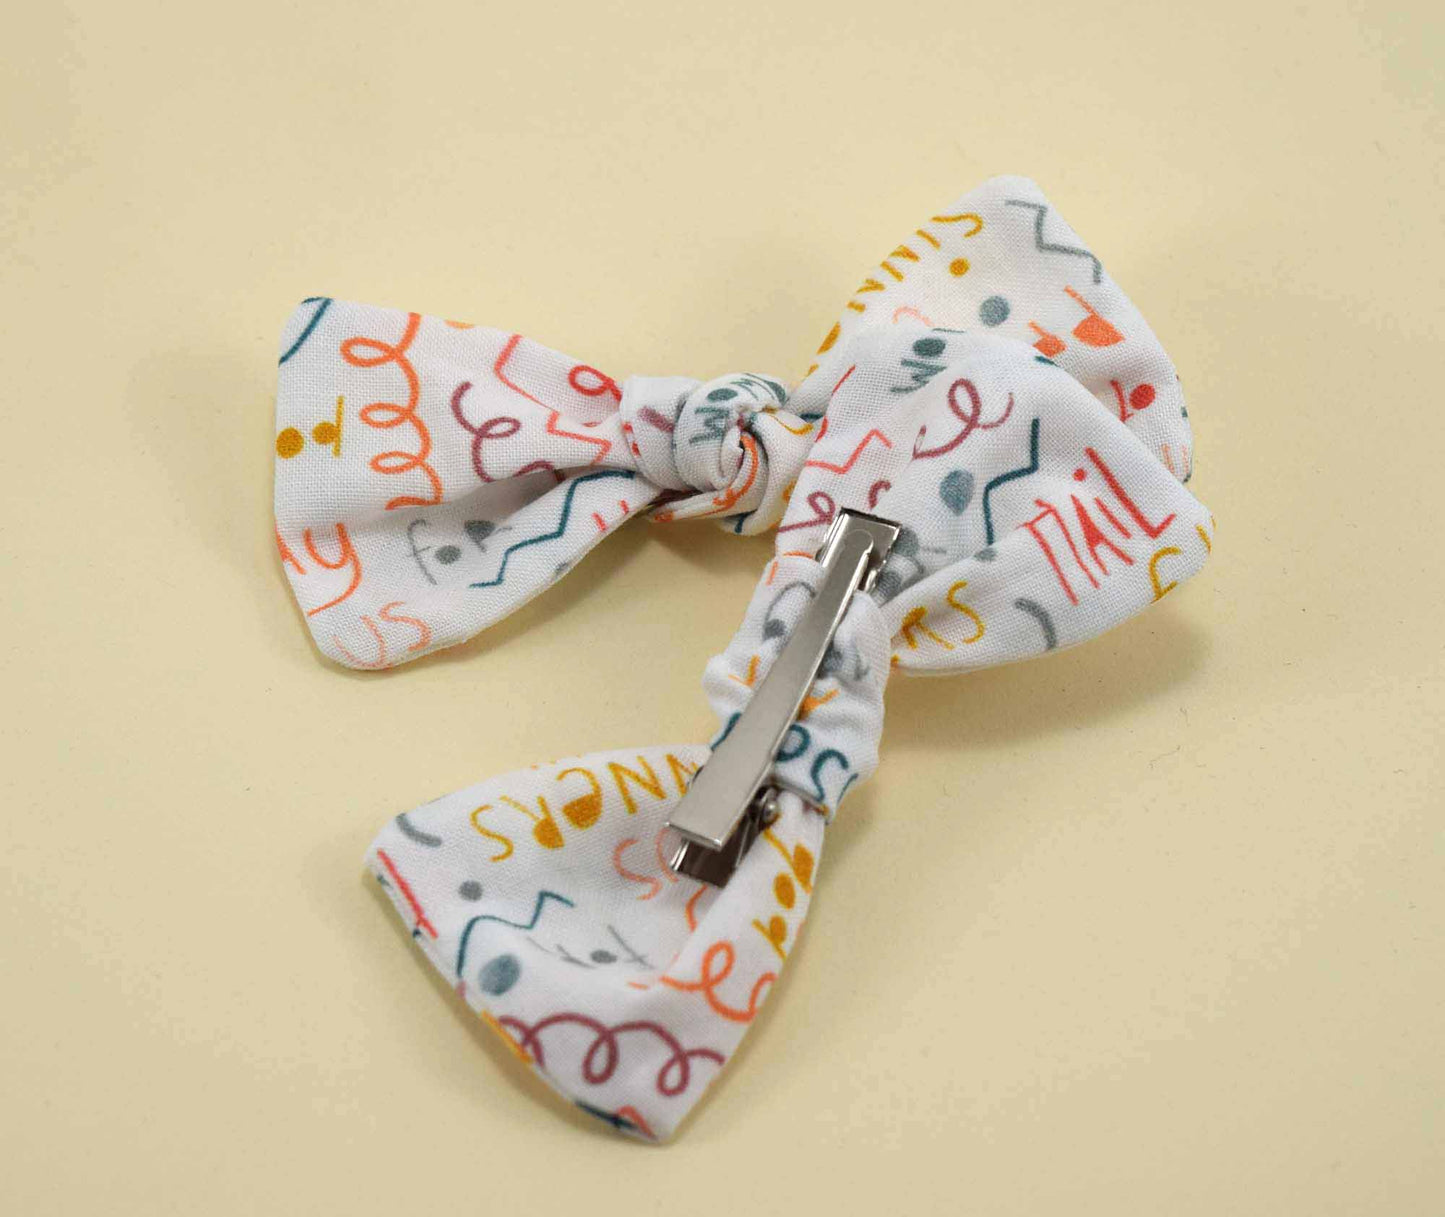 Catholic Knotted Hair Bows - Doodle Hail Mary